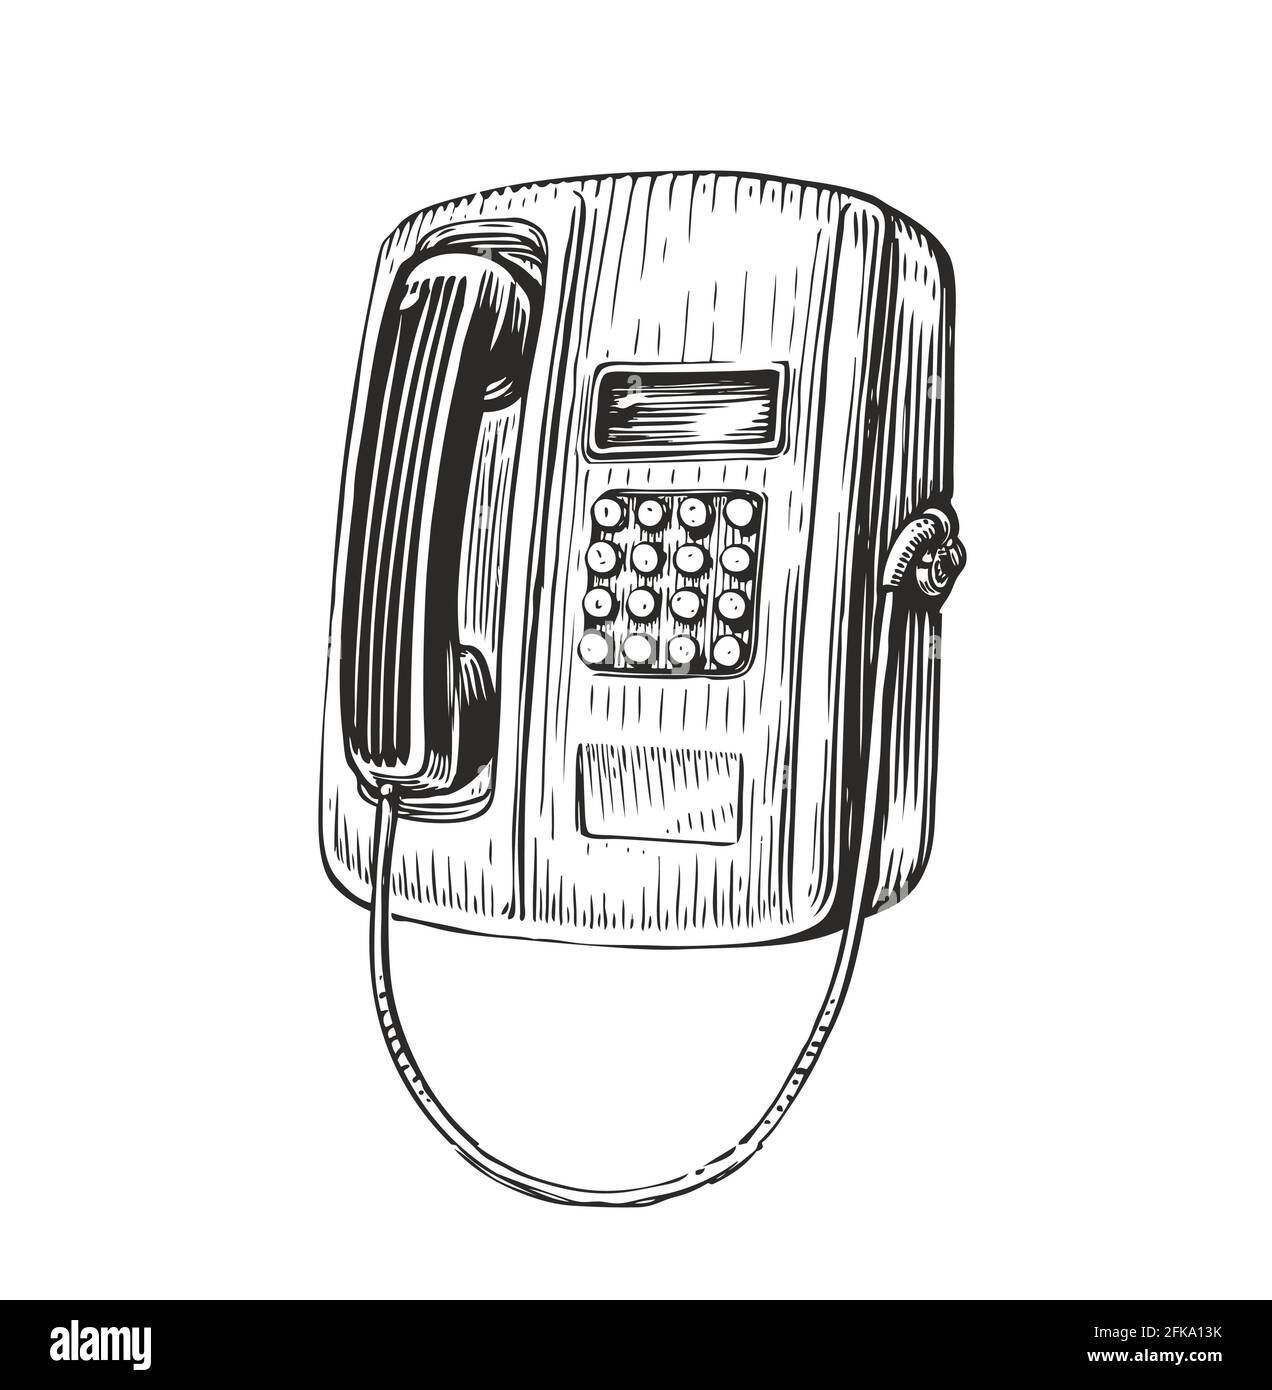 Payphone retro sketch. Public phone in vintage engraving style. Vector illustration Stock Vector